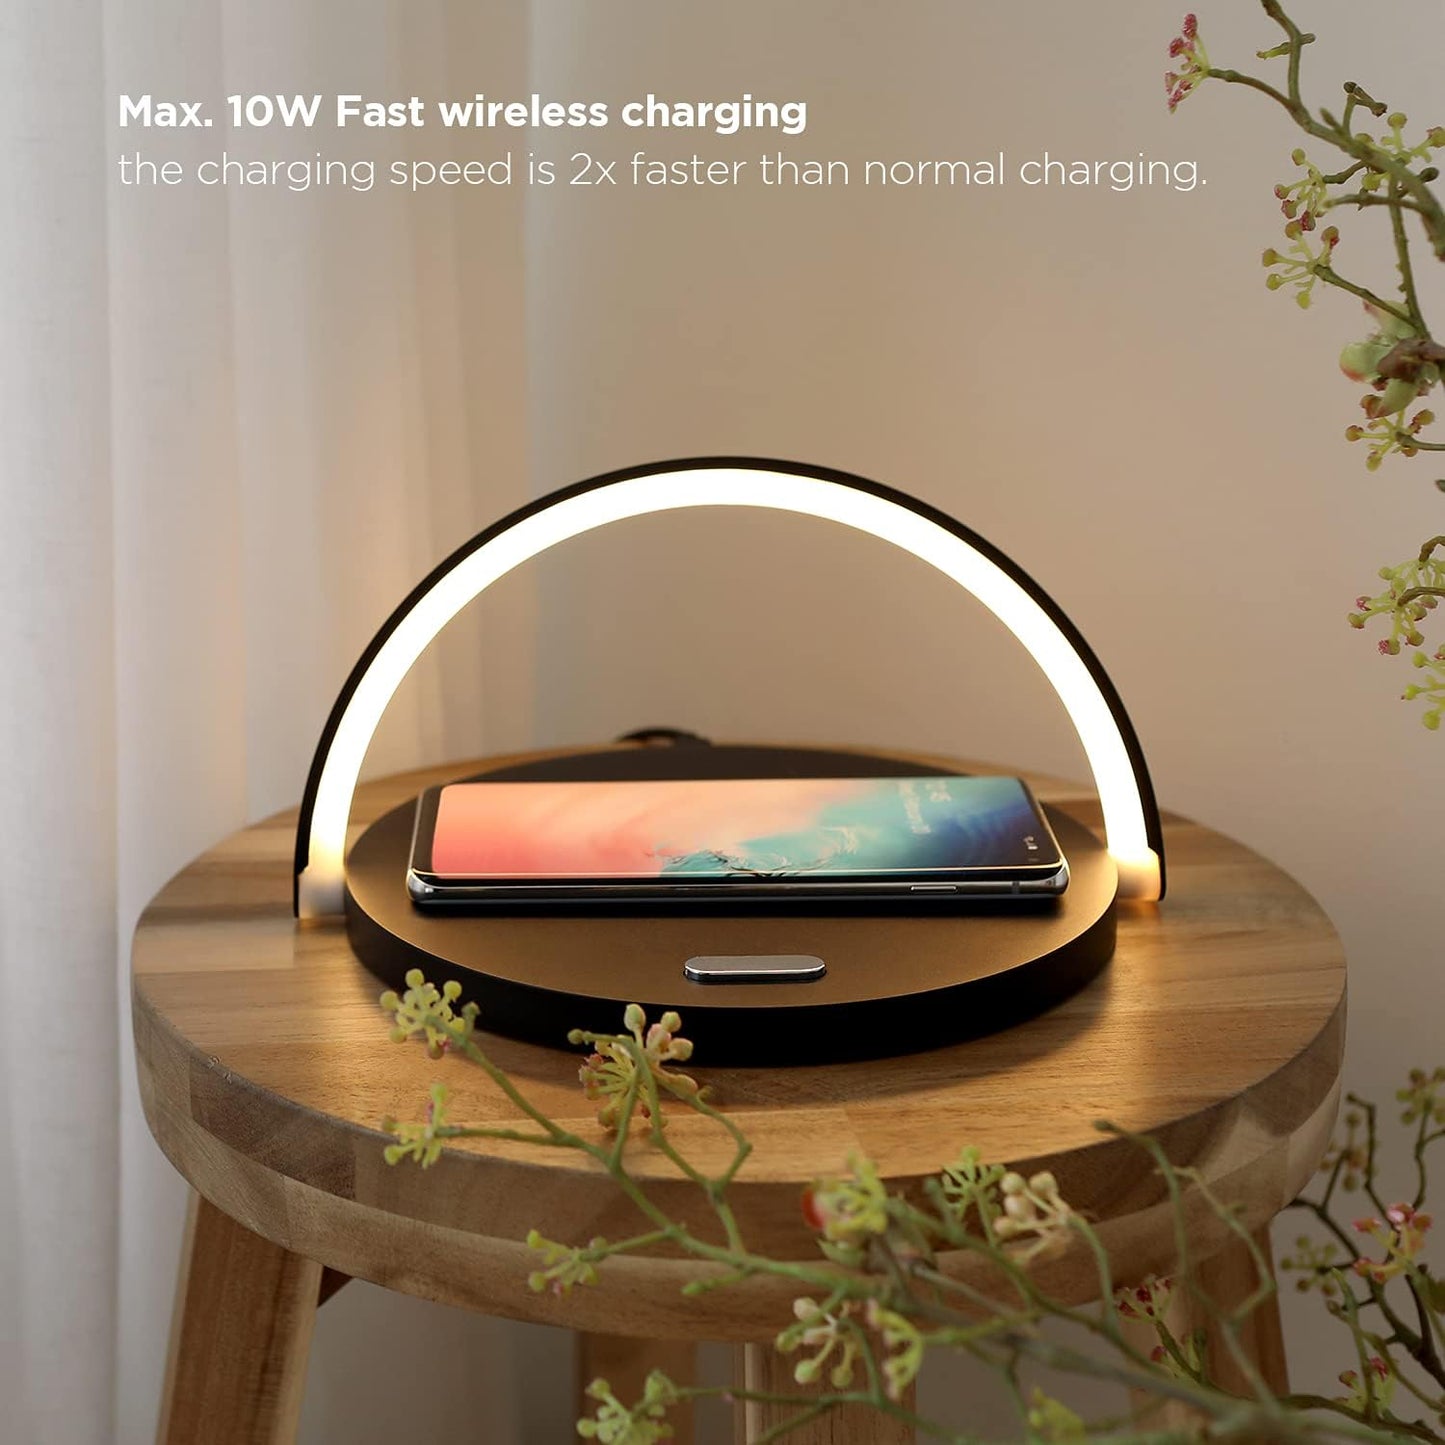 Superbe Modern Simple Wireless Charging Nightlight (Wood), Max.15W Fast Wireless Charger, Touch Control, 3-Level Brightness, for Galaxy S10/S20/Note 10, iPhone X/11/11 Pro, Airpods 2, LG V50/G7/G8